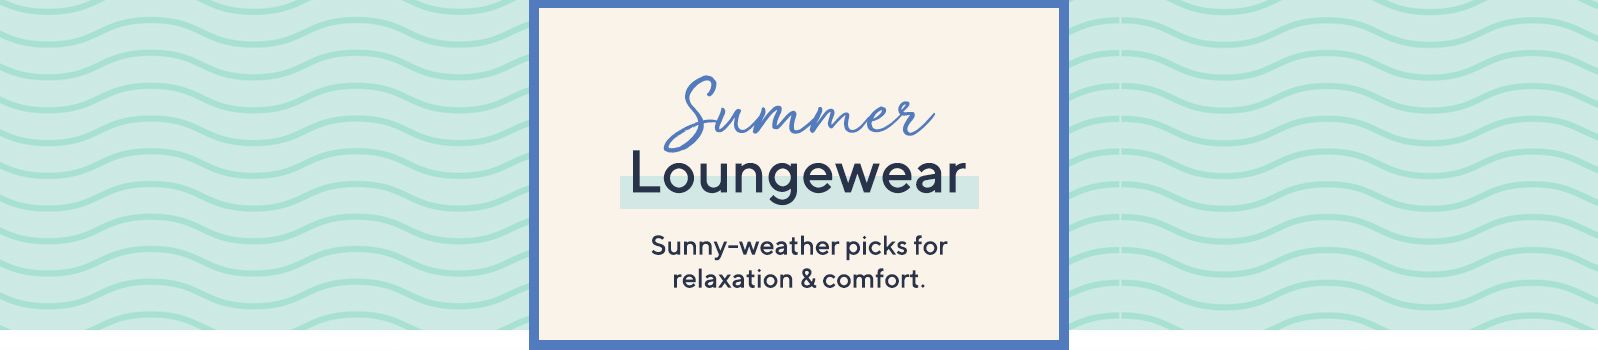 Summer Loungewear.  Sunny-weather picks for relaxation & comfort.